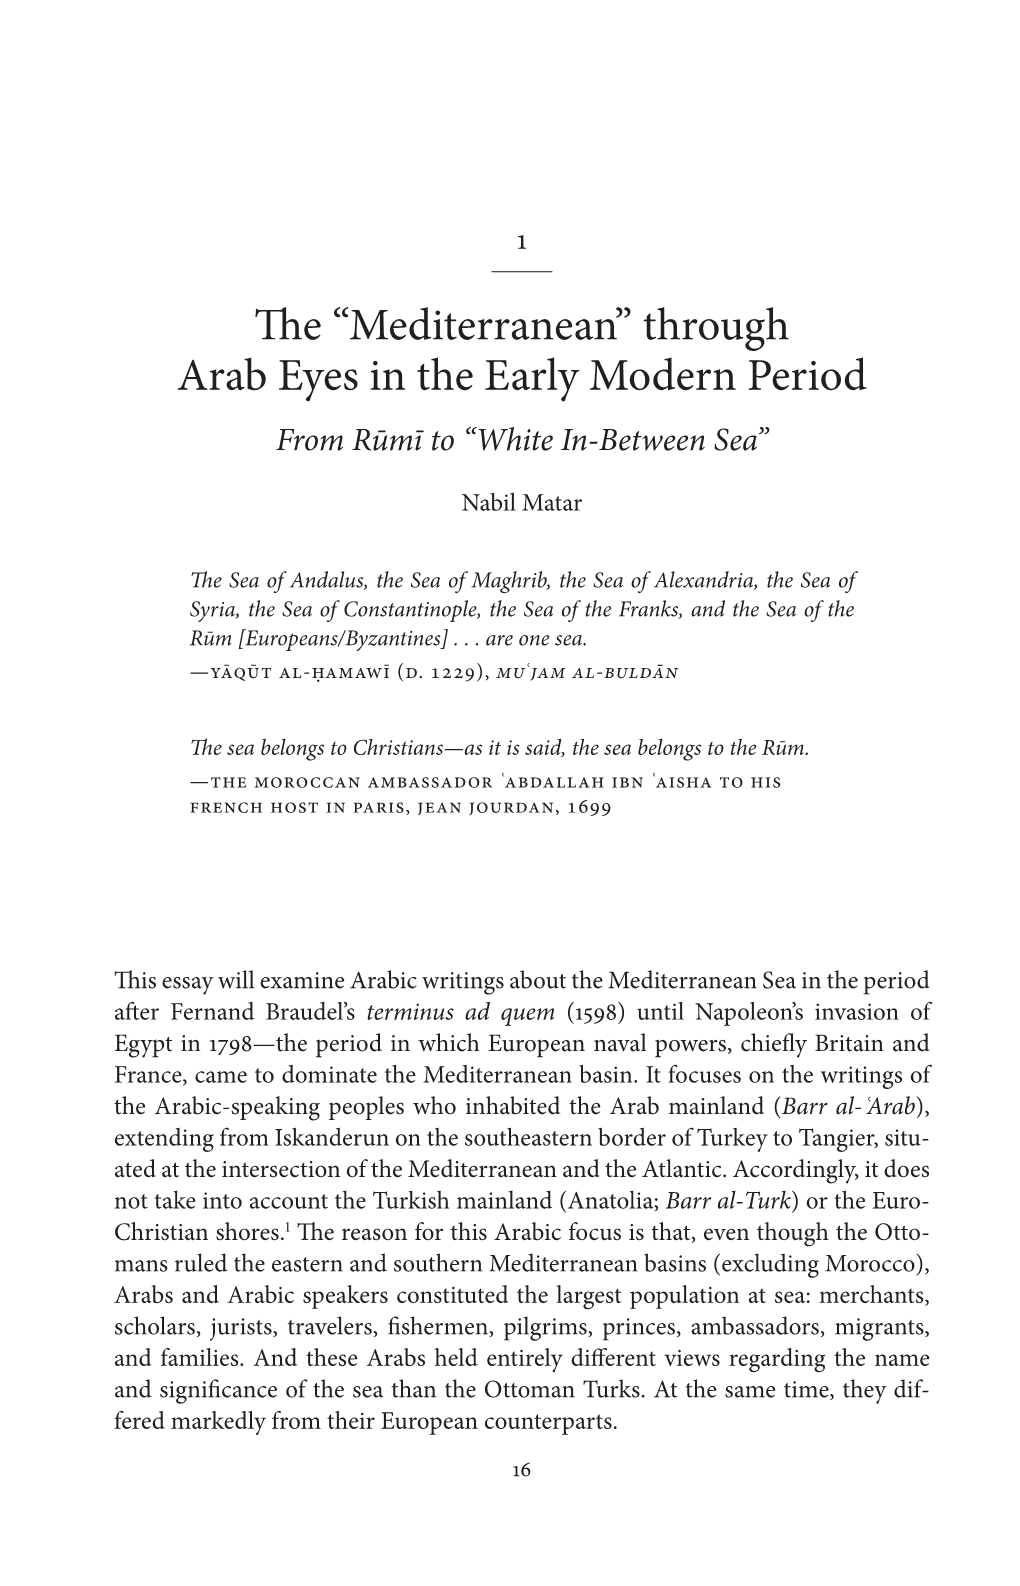 The “Mediterranean” Through Arab Eyes in the Early Modern Period from Rūmī to “White In-Between Sea”